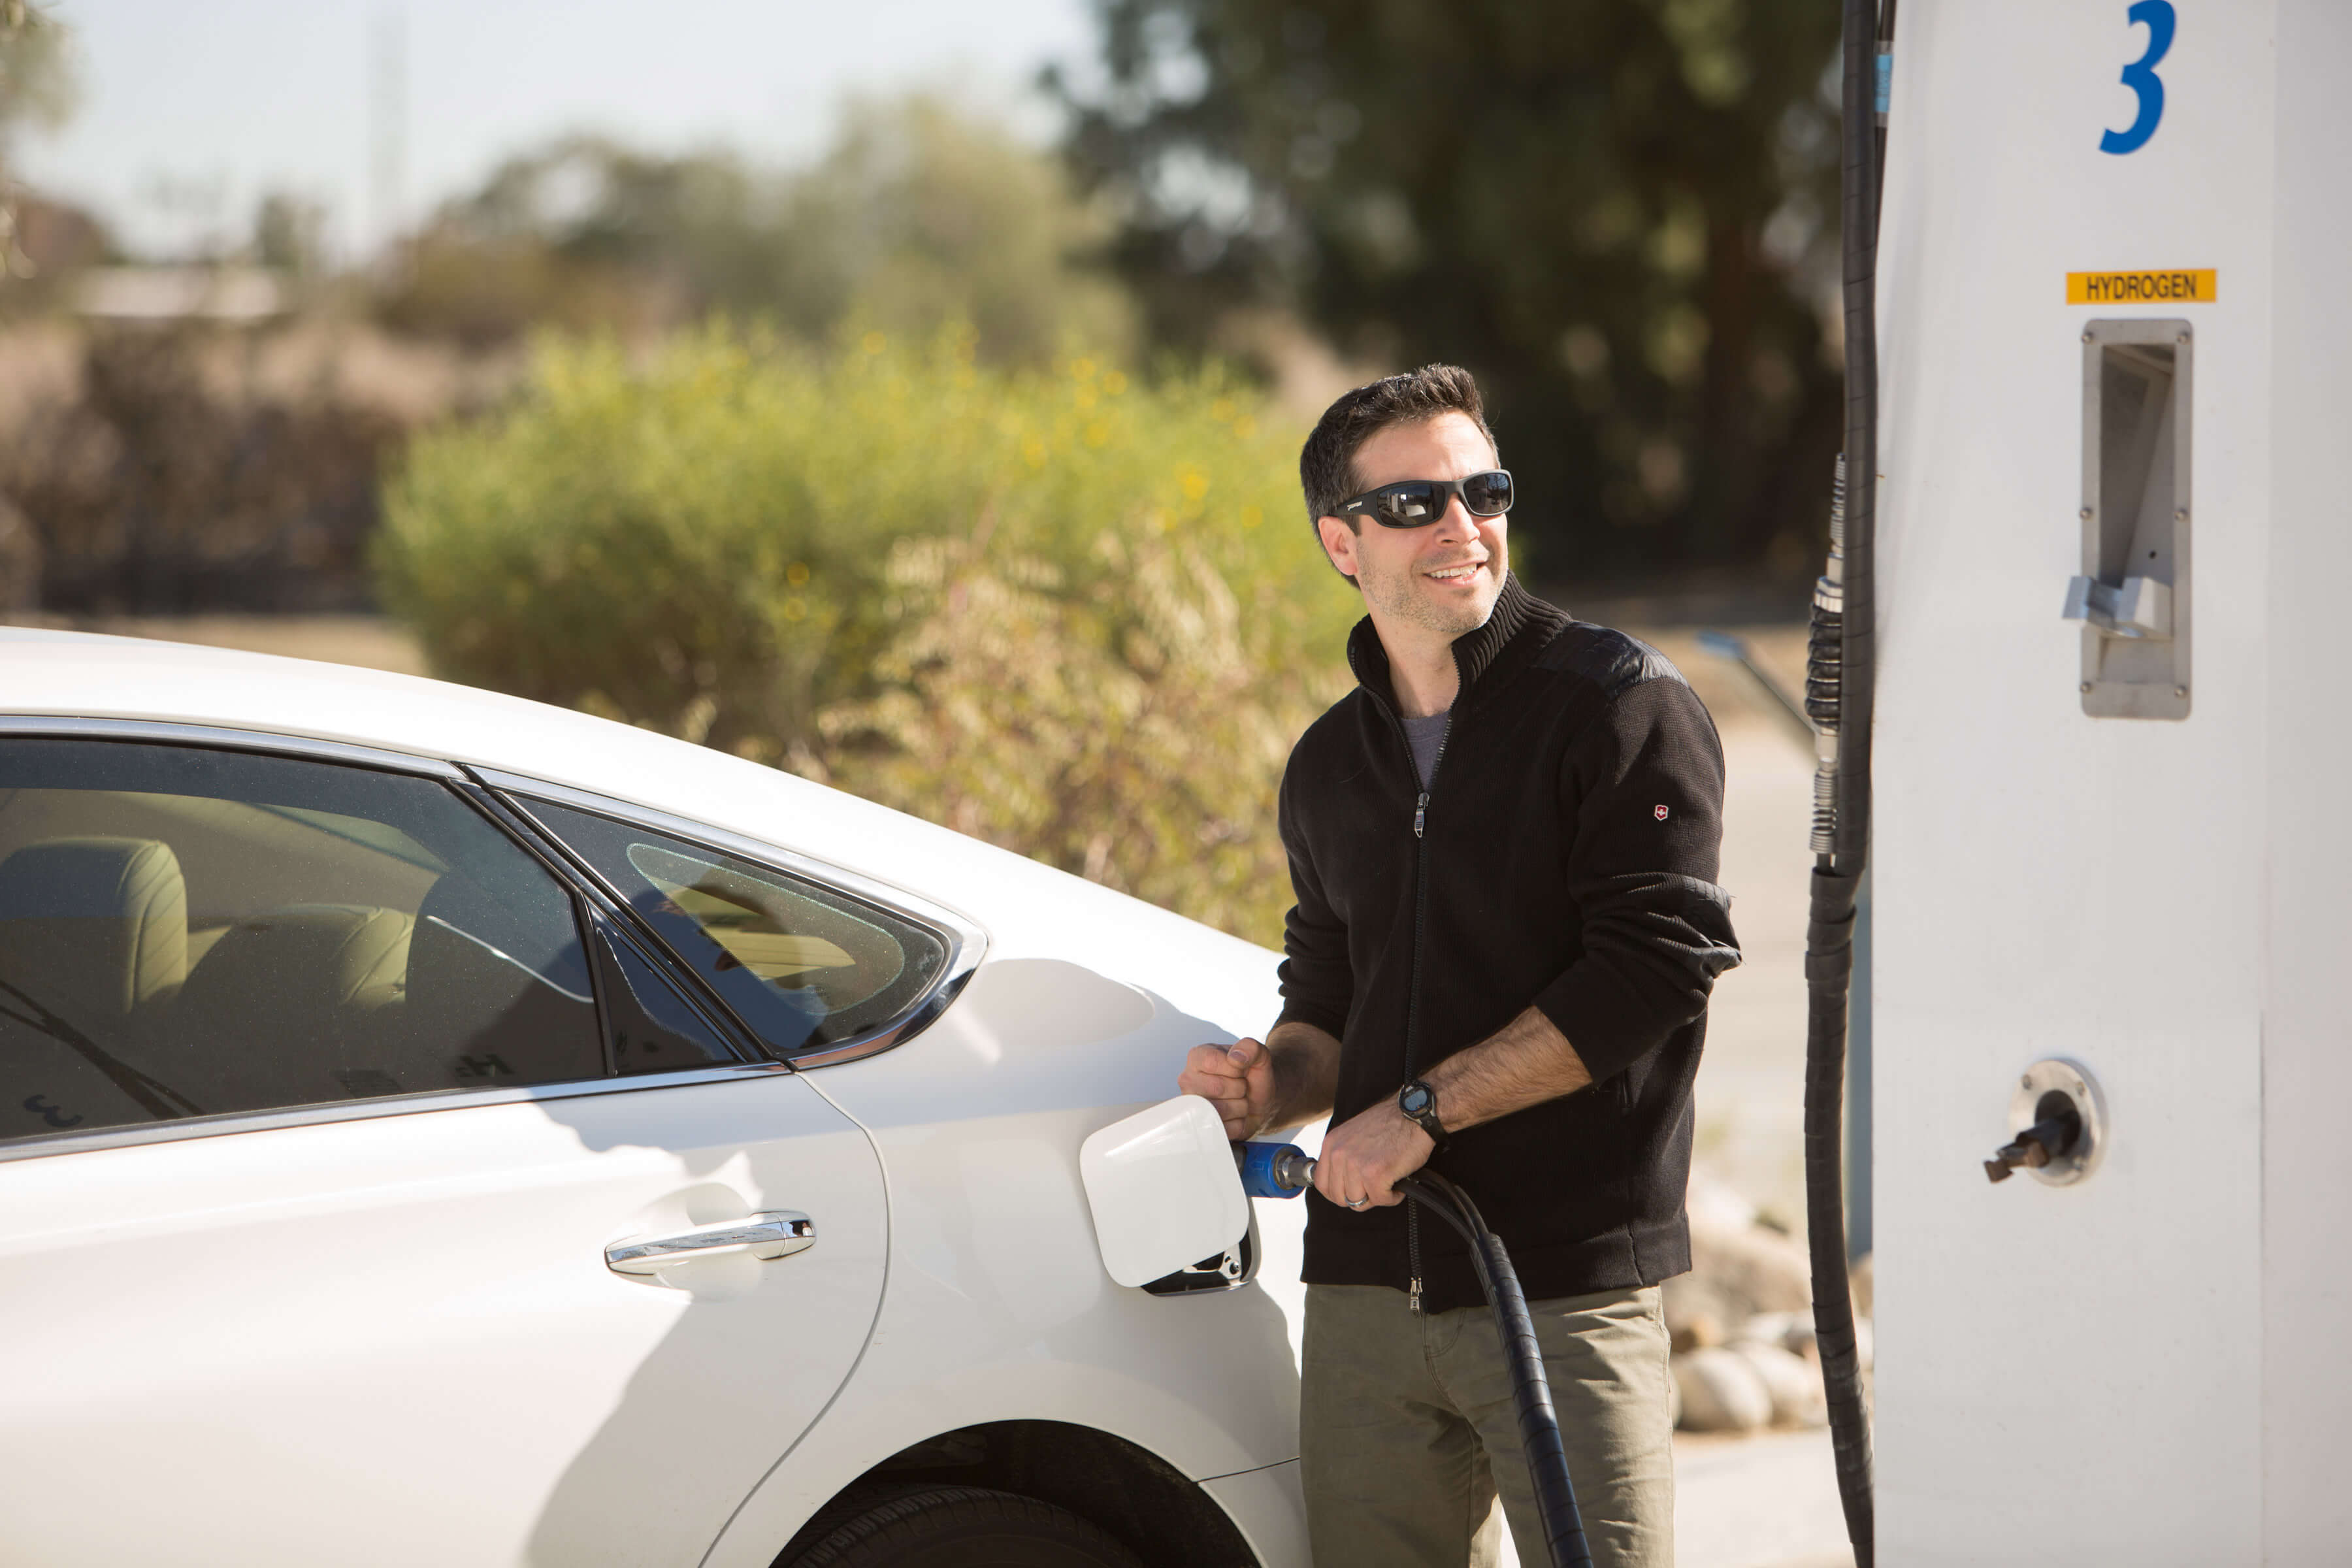 Fueling at Thousand Palms' Clean Fuel Pumps